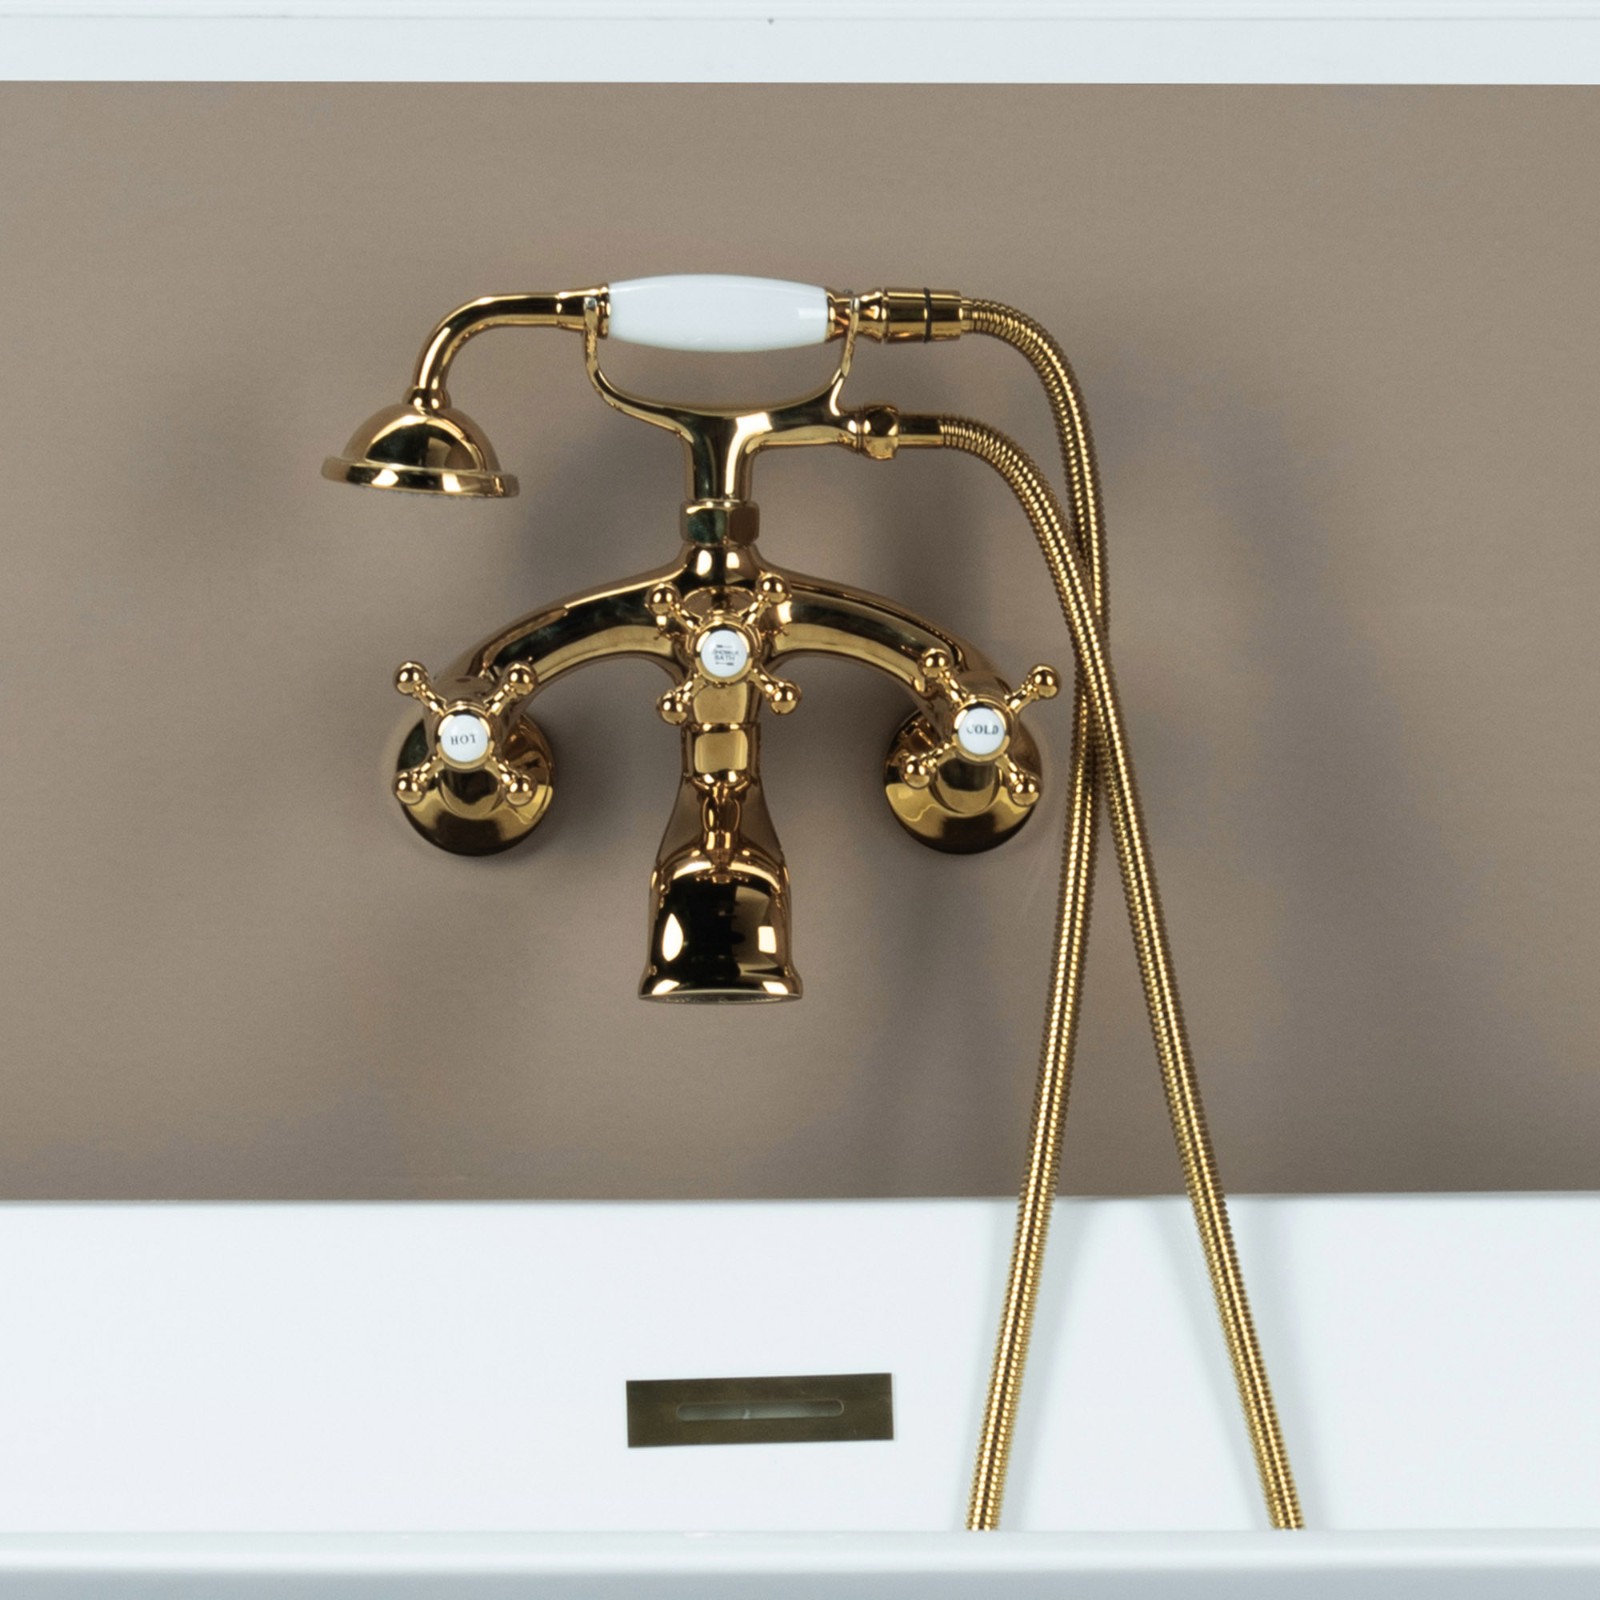  WOODBRIDGE F0034PG Dual Mounting Clawfoot Tub Filler Faucet with Hand Shower and Hose in Polished Gold_787